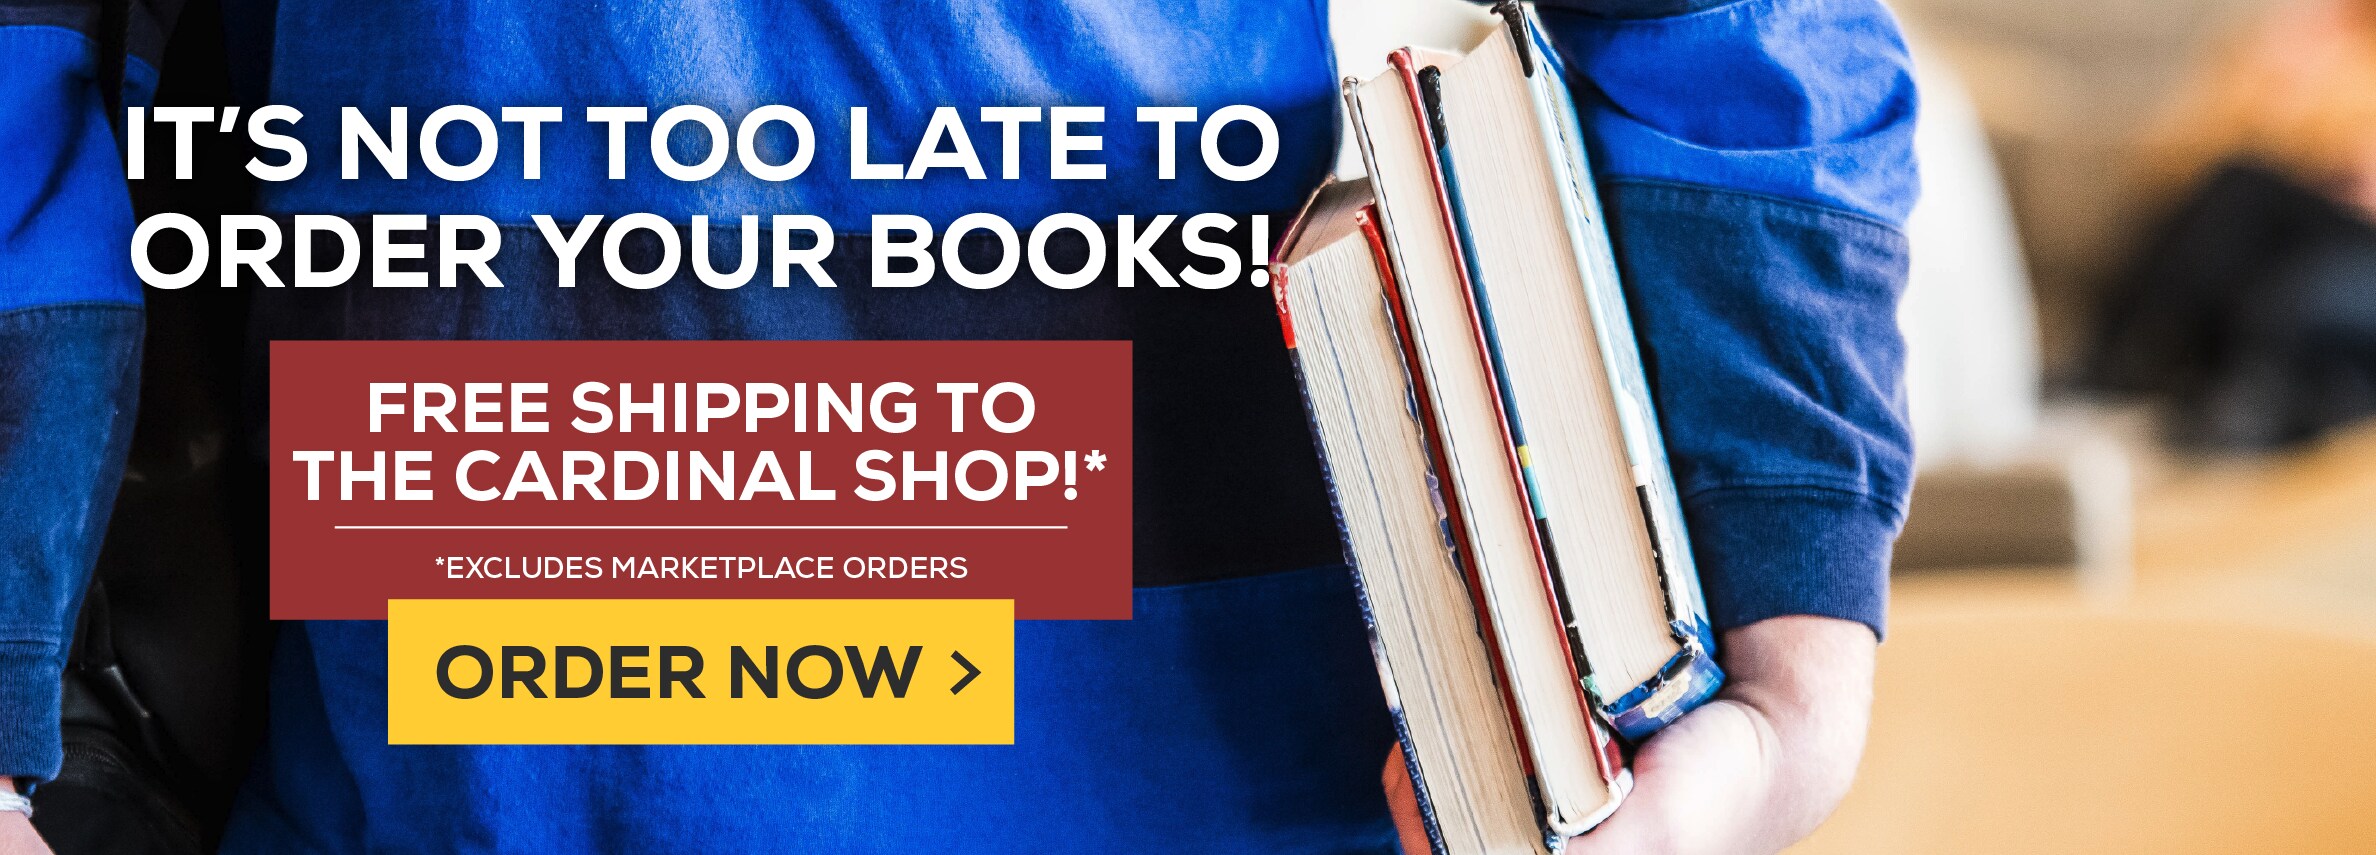 ItÃ¢â‚¬â„¢s not too late to order your books! Free shipping to the Cardinal Shop!* Excludes marketplace purchases. Order Now.